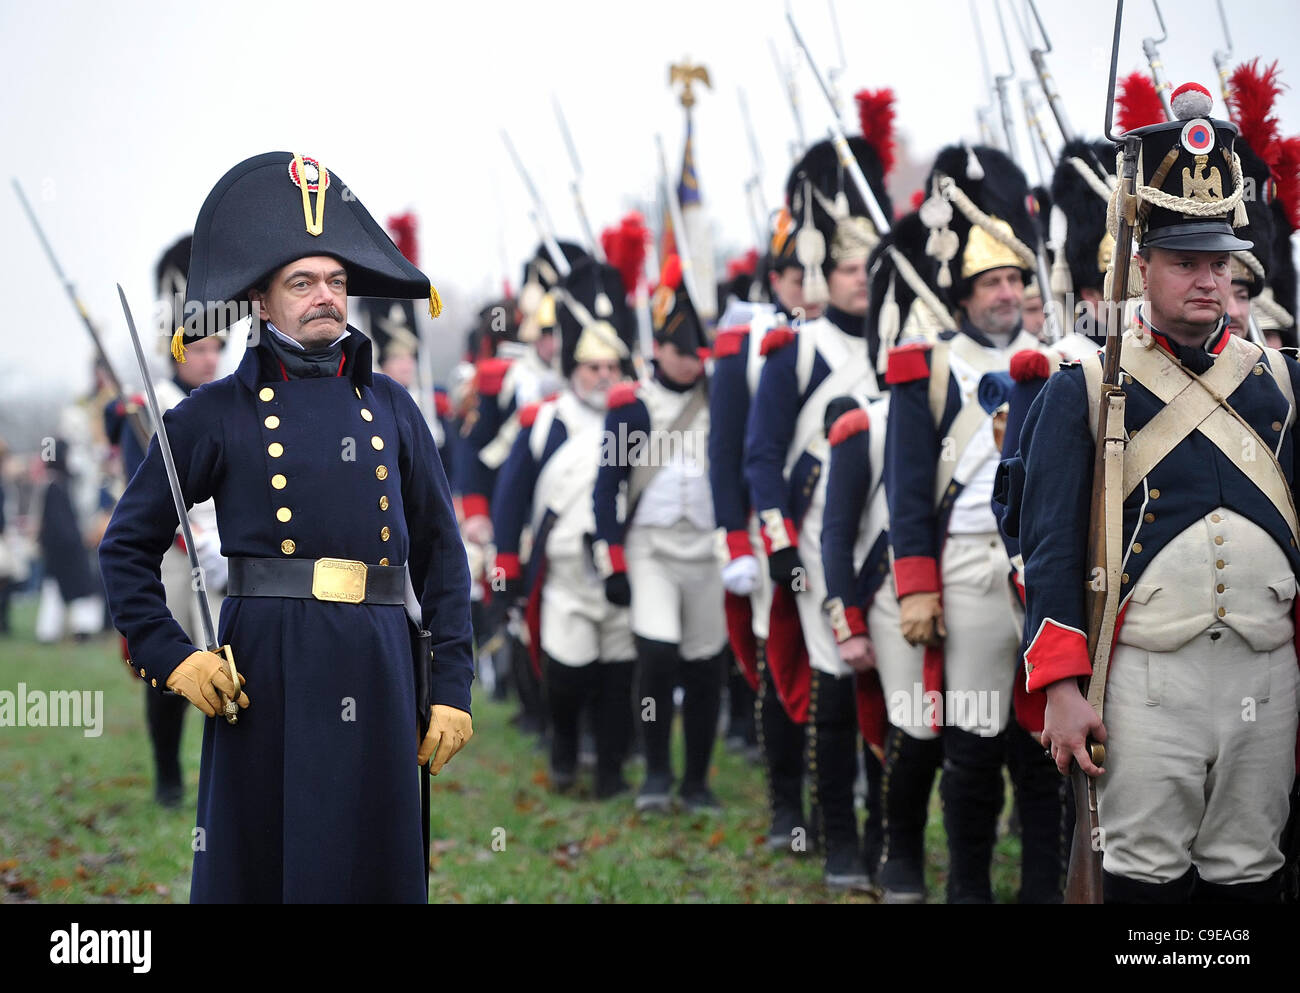 Members of a military history fan club are seen during the re-enactment of the Battle of Three Emperors at Slavkov, formerly Austerlitz, Czech Republic, on Saturday, December 3, 2011. History enthusiasts from the Czech Republic and abroad re-enacted the battle in which Napoleon's troops defeated Rus Stock Photo